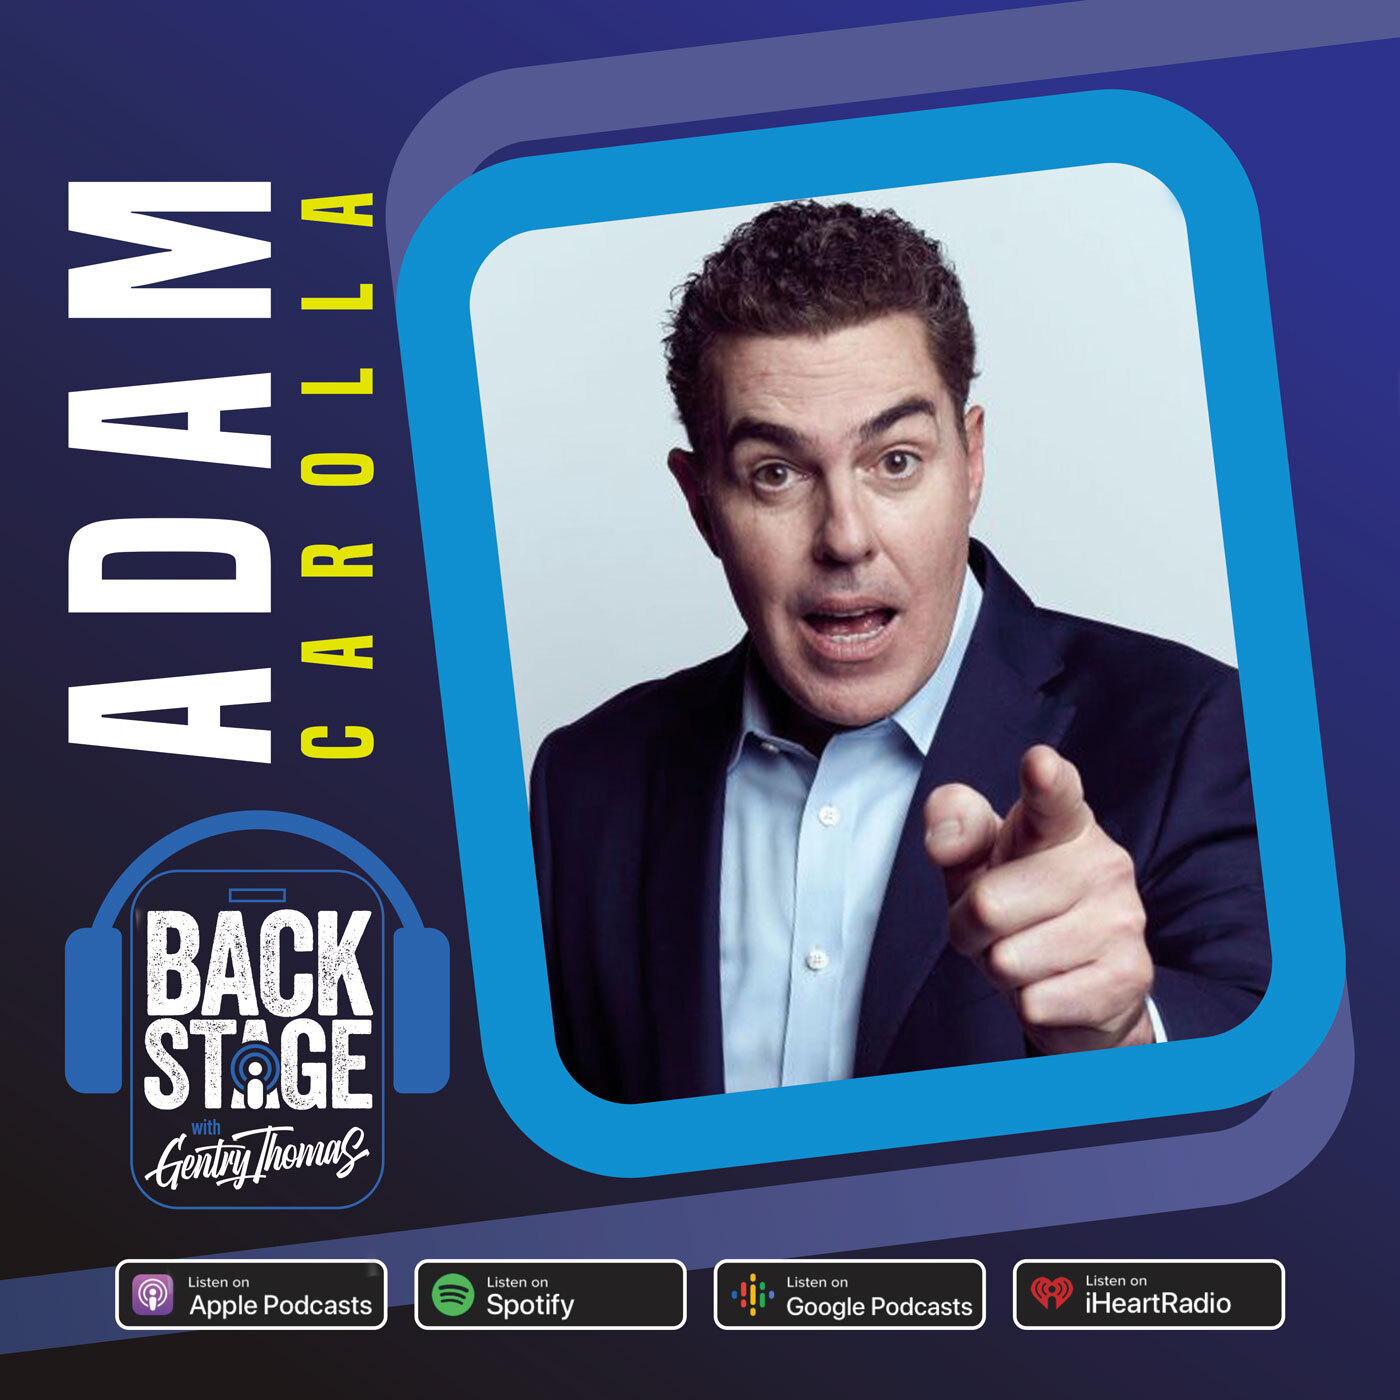 Adam Carolla Unplugged: From Comedy to Politics, Sports, and Everything In Between